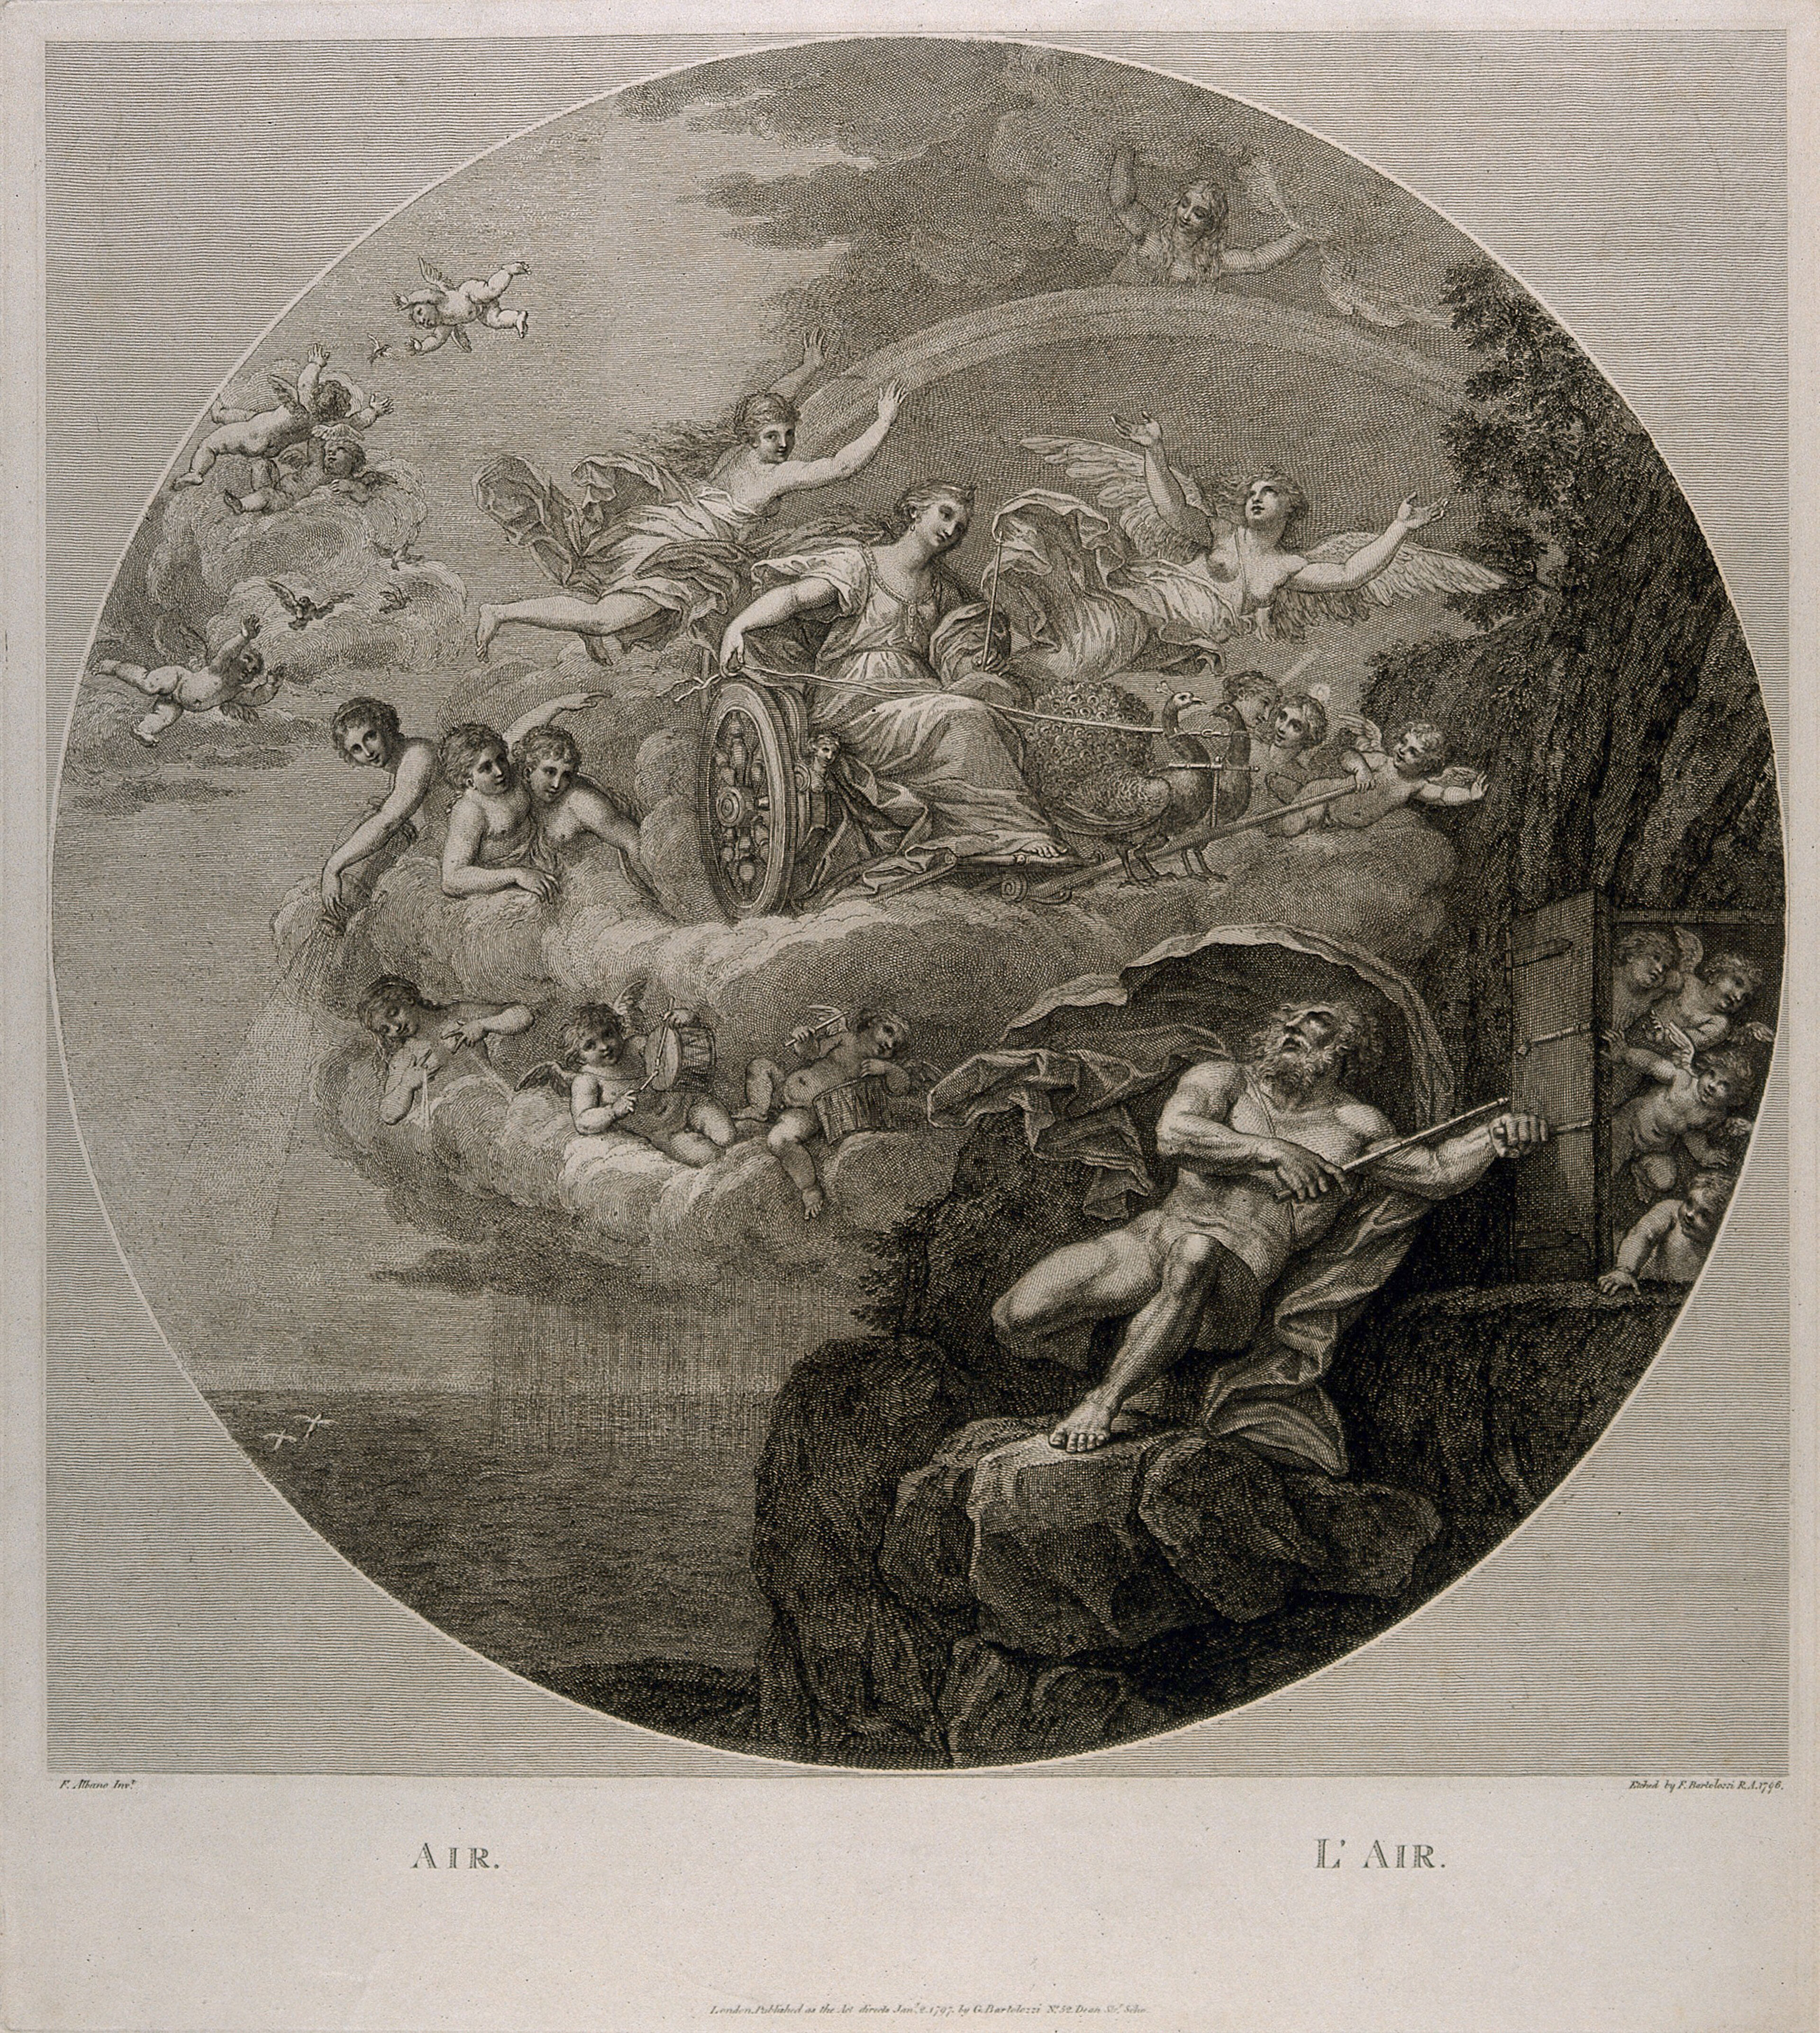 Juno in a chariot drawn by two peacocks flying through the sky surrounded by nymphs and cherubs, Jupiter on the ground trying to lock up a group of putti, symbolising the element air. Etching by F. Bartolozzi, 1796, after F. Albani.